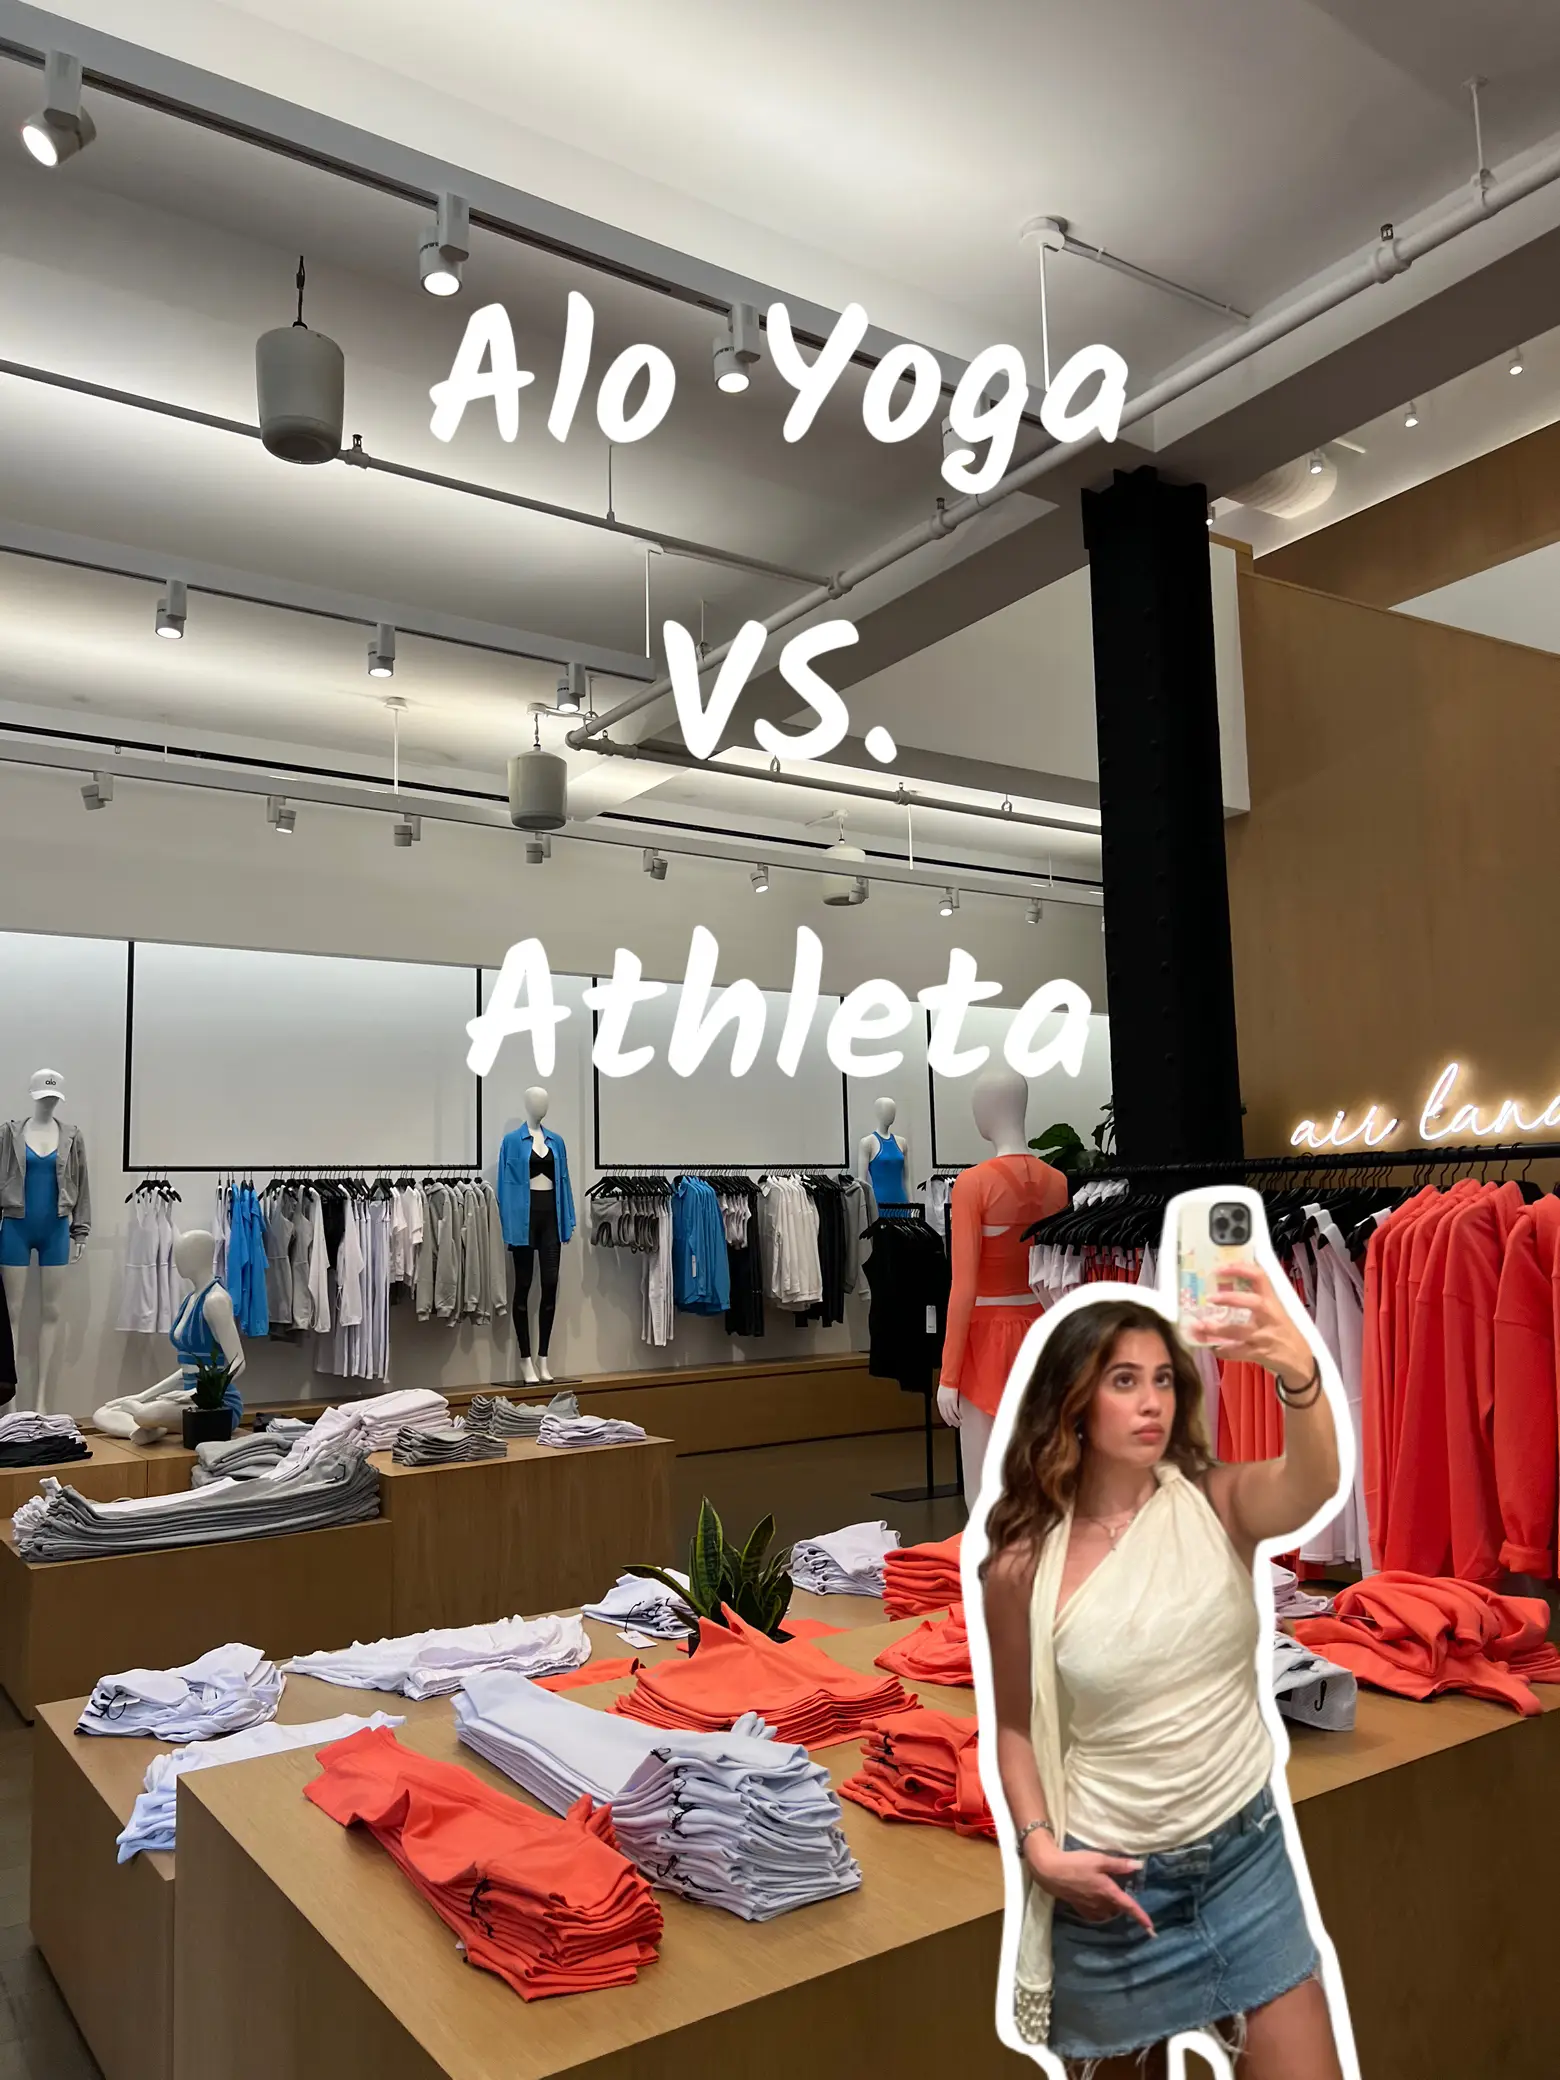 Alo Yoga Lands on Lululemon's Home Turf with 1st Vancouver Store